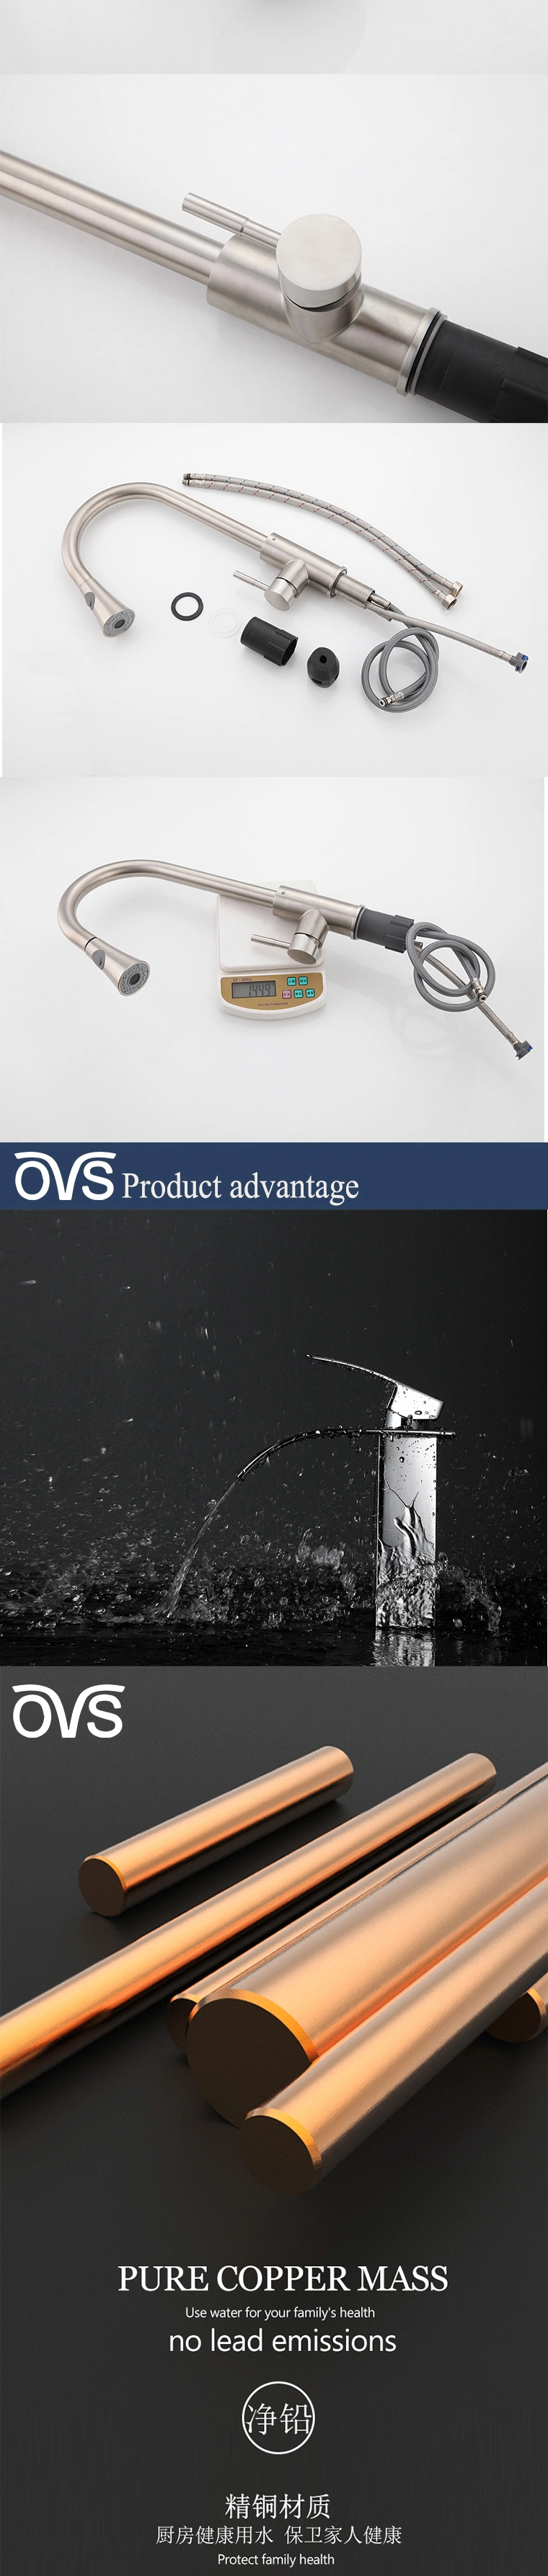 Ovs Contemporary Style 304 Stainless Steel Pull out Kitchen Faucet with Flexible Hose